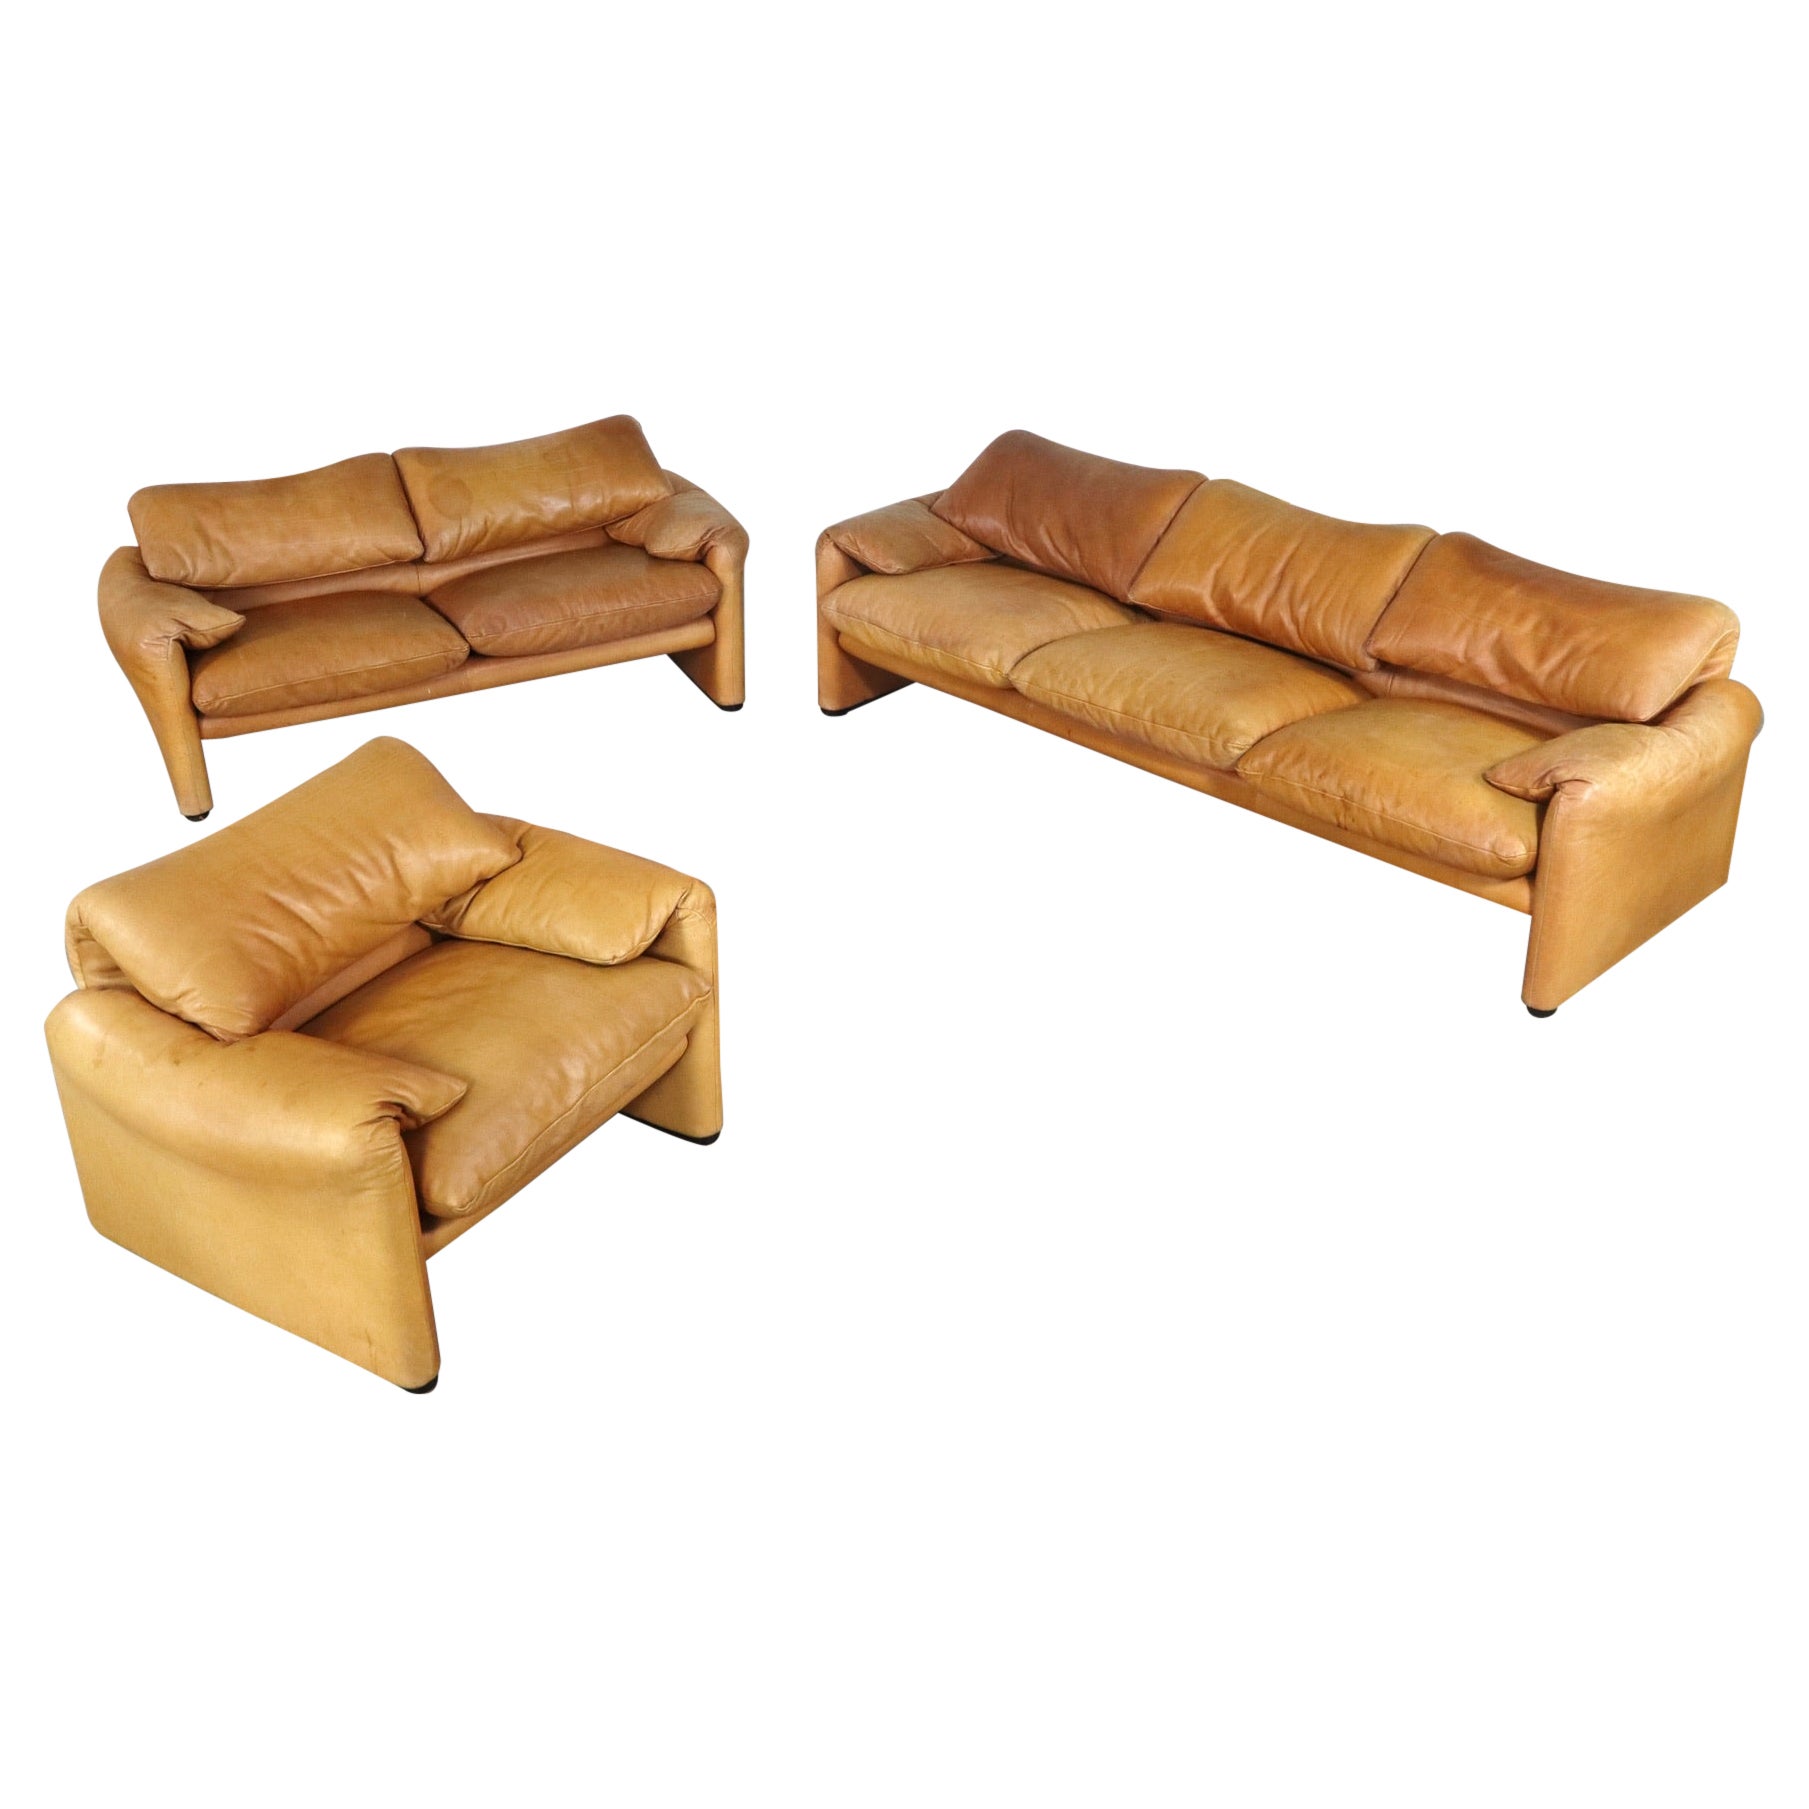 Maralunga Set in Cognac Leather by Vico Magistretti for Cassina, 1970s